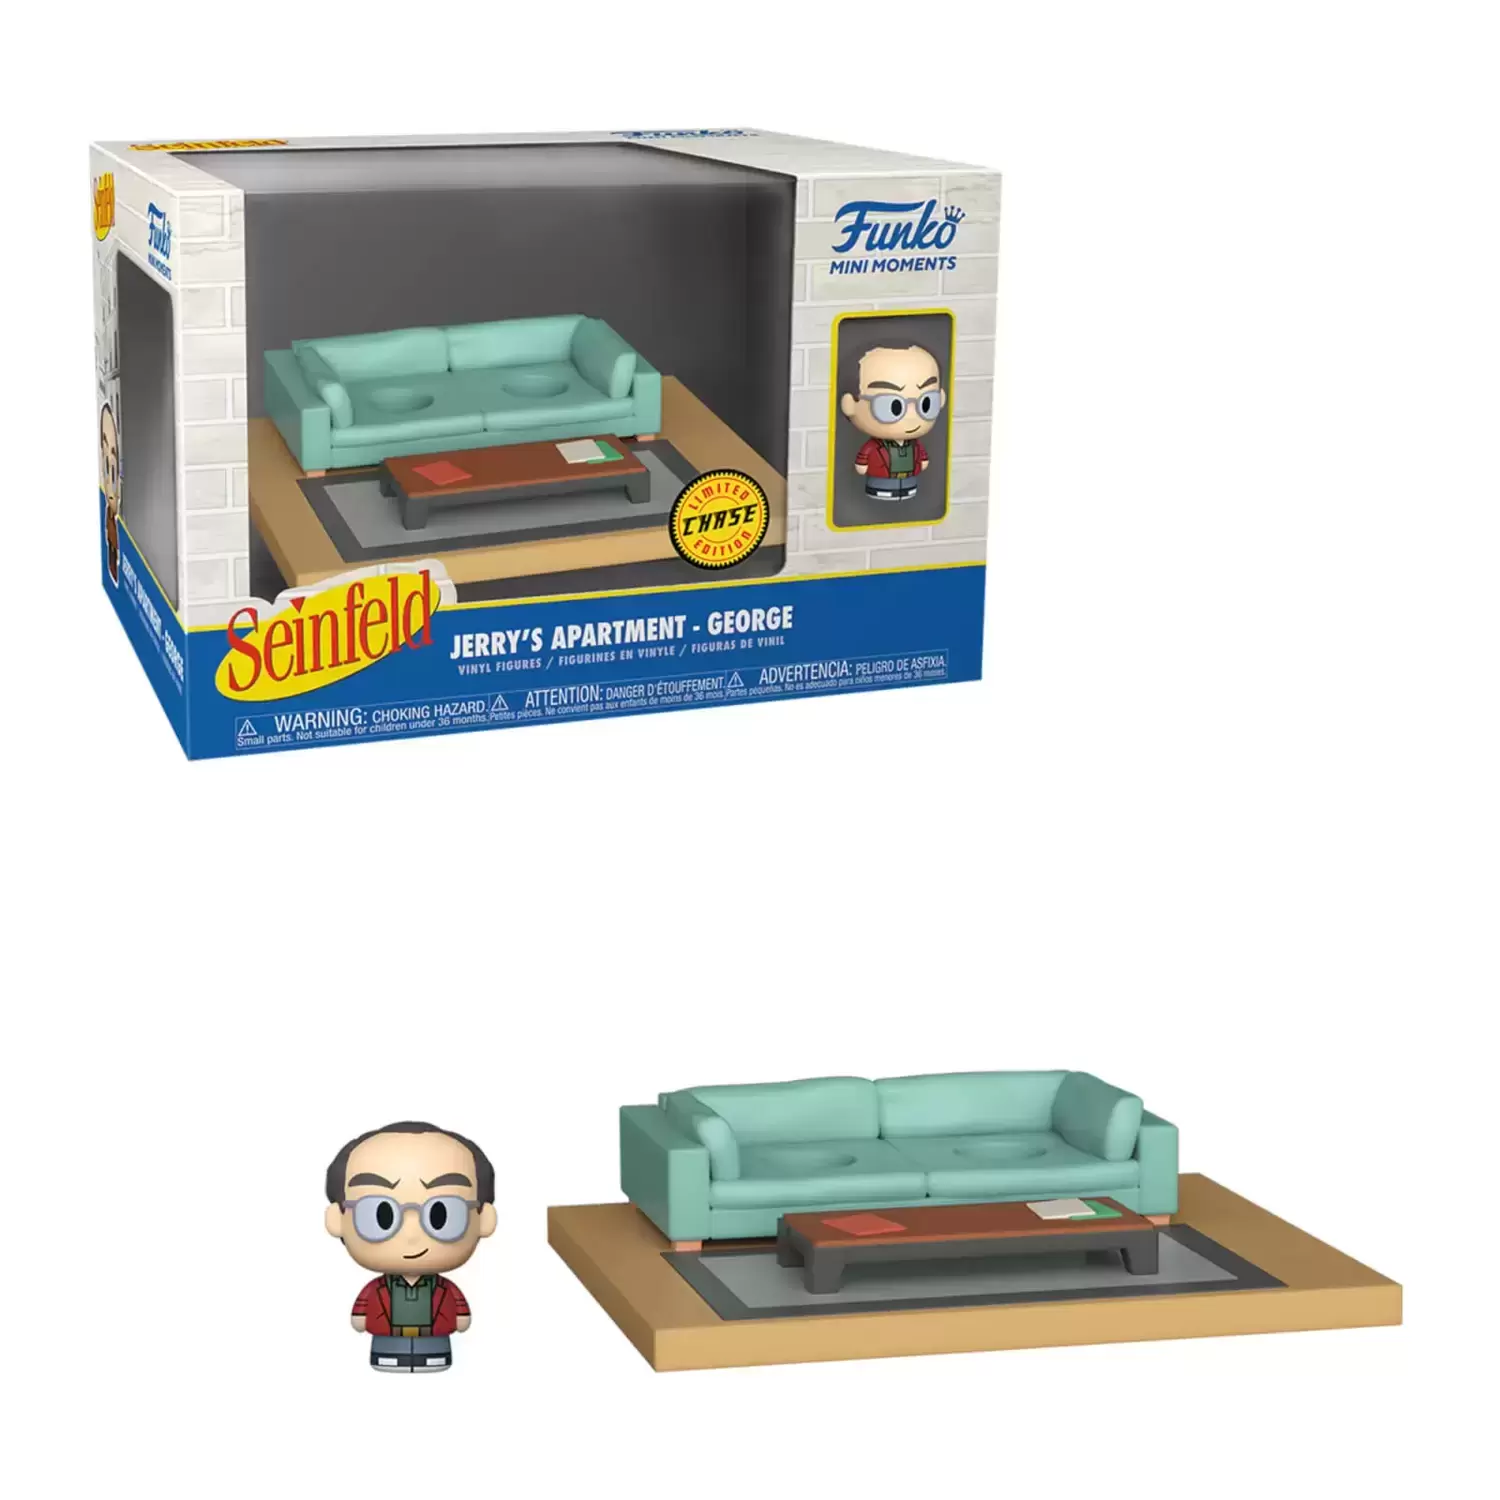 Funko Mini Moments - Seinfeld - Jerry\'s Apartment George Chase